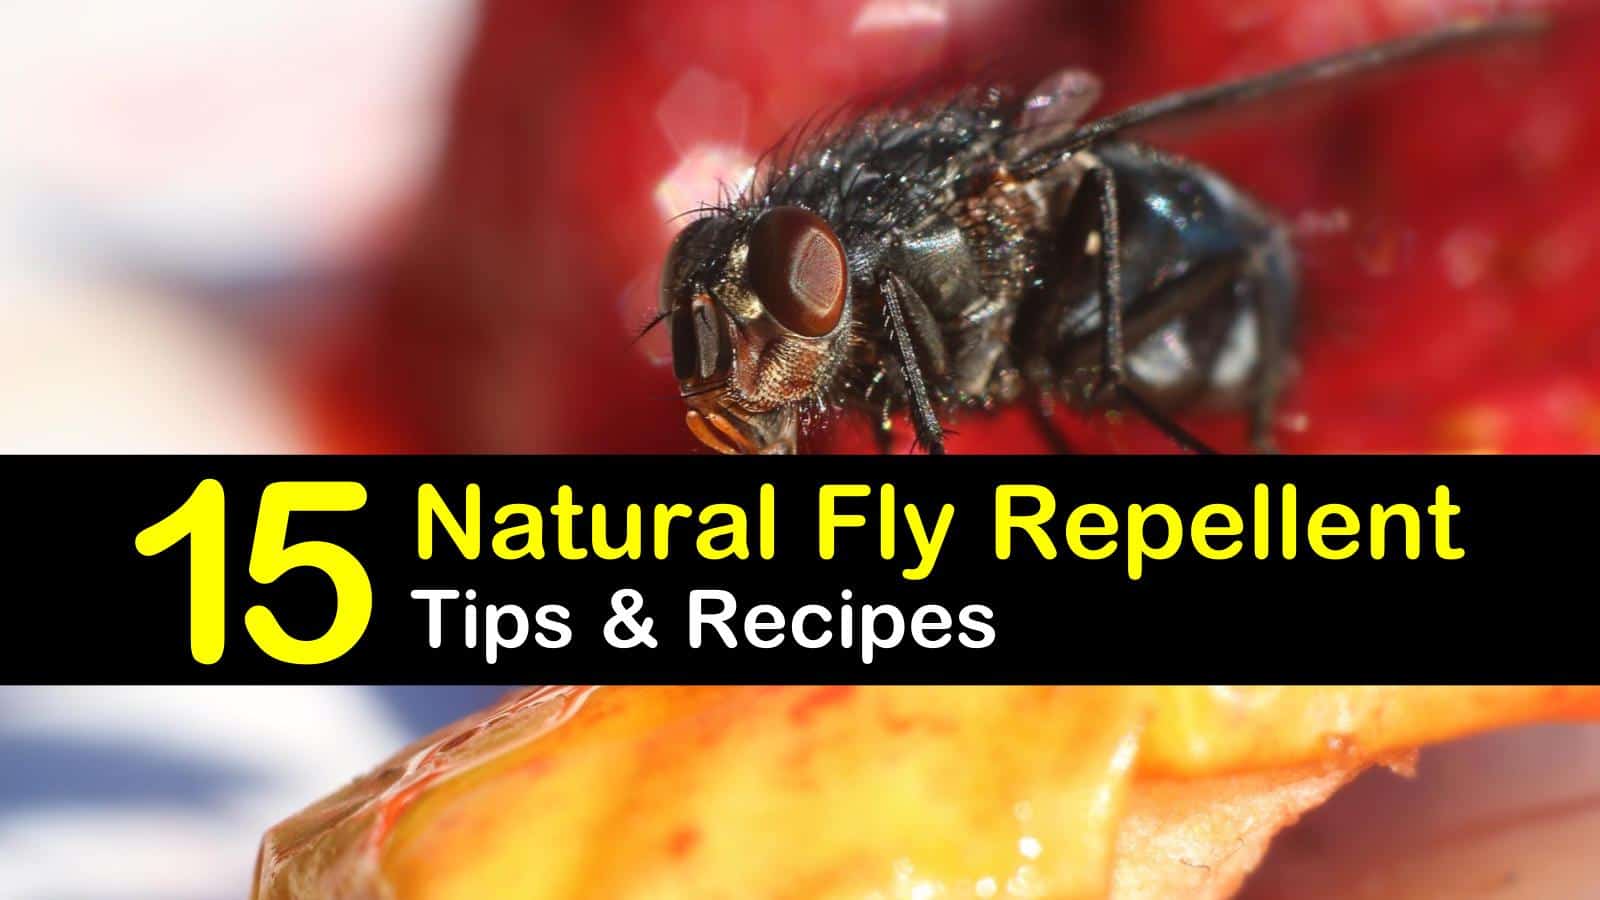 Natural Fly Repellent